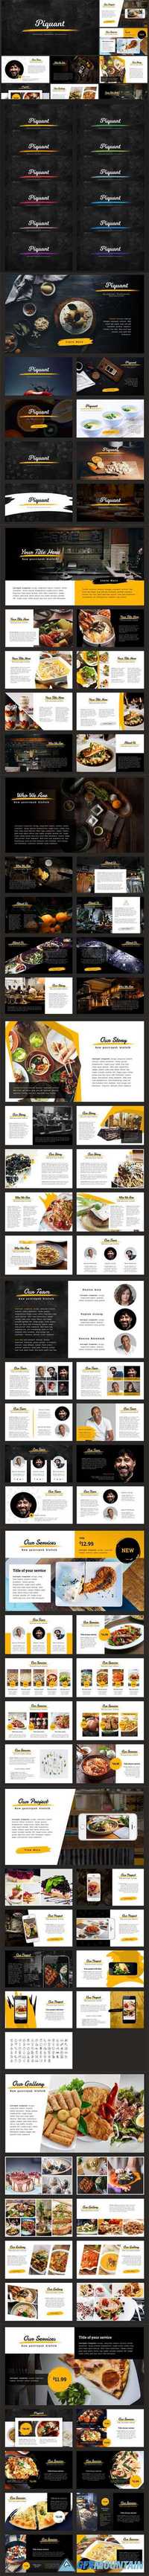 Piquant Powerpoint Template 962588